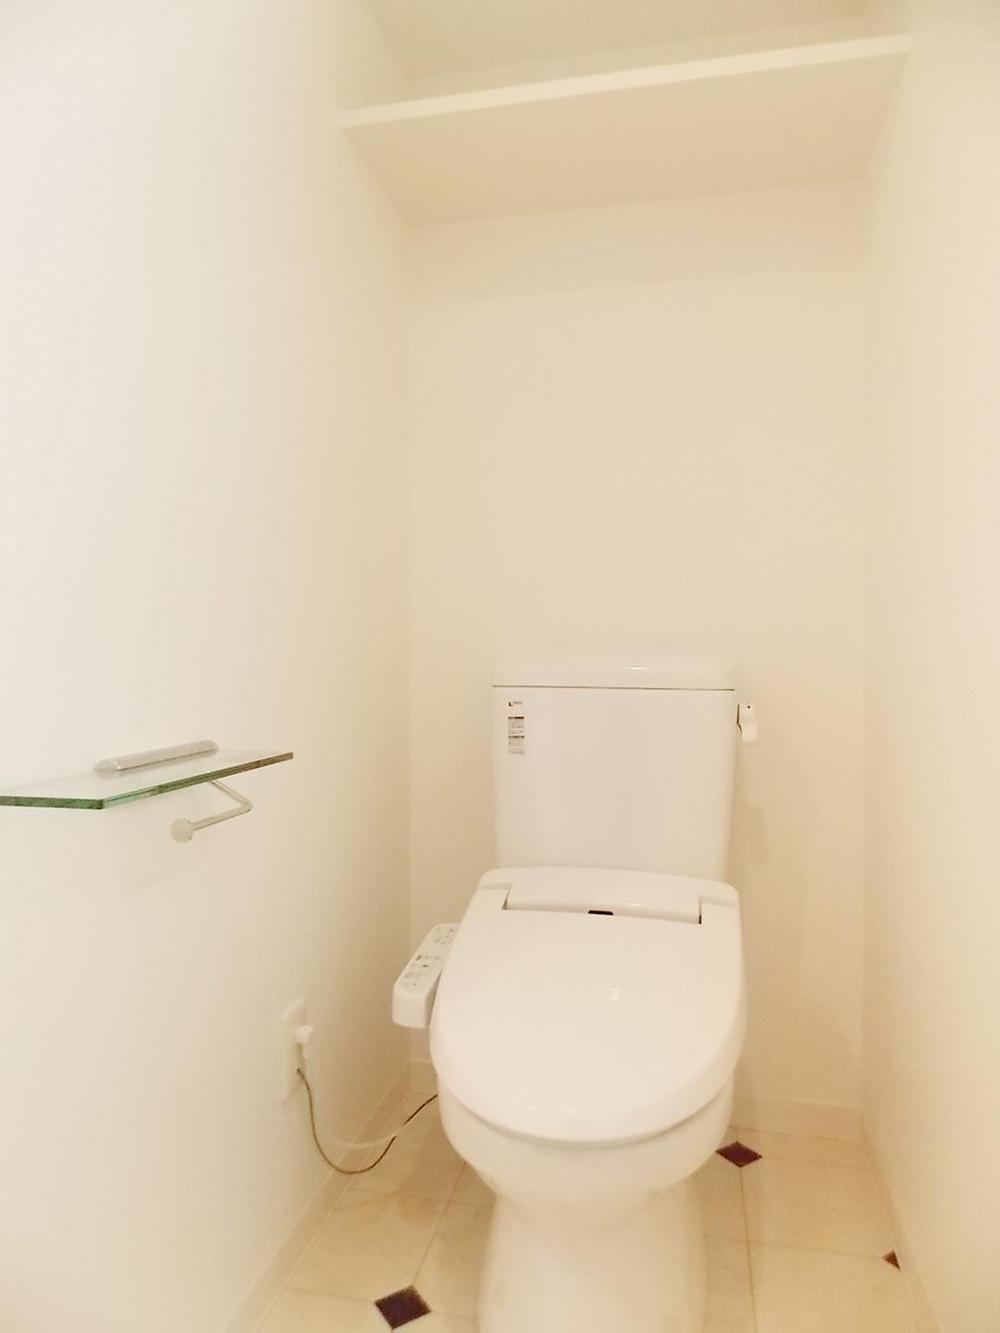 Toilet. It is a high-function toilet.